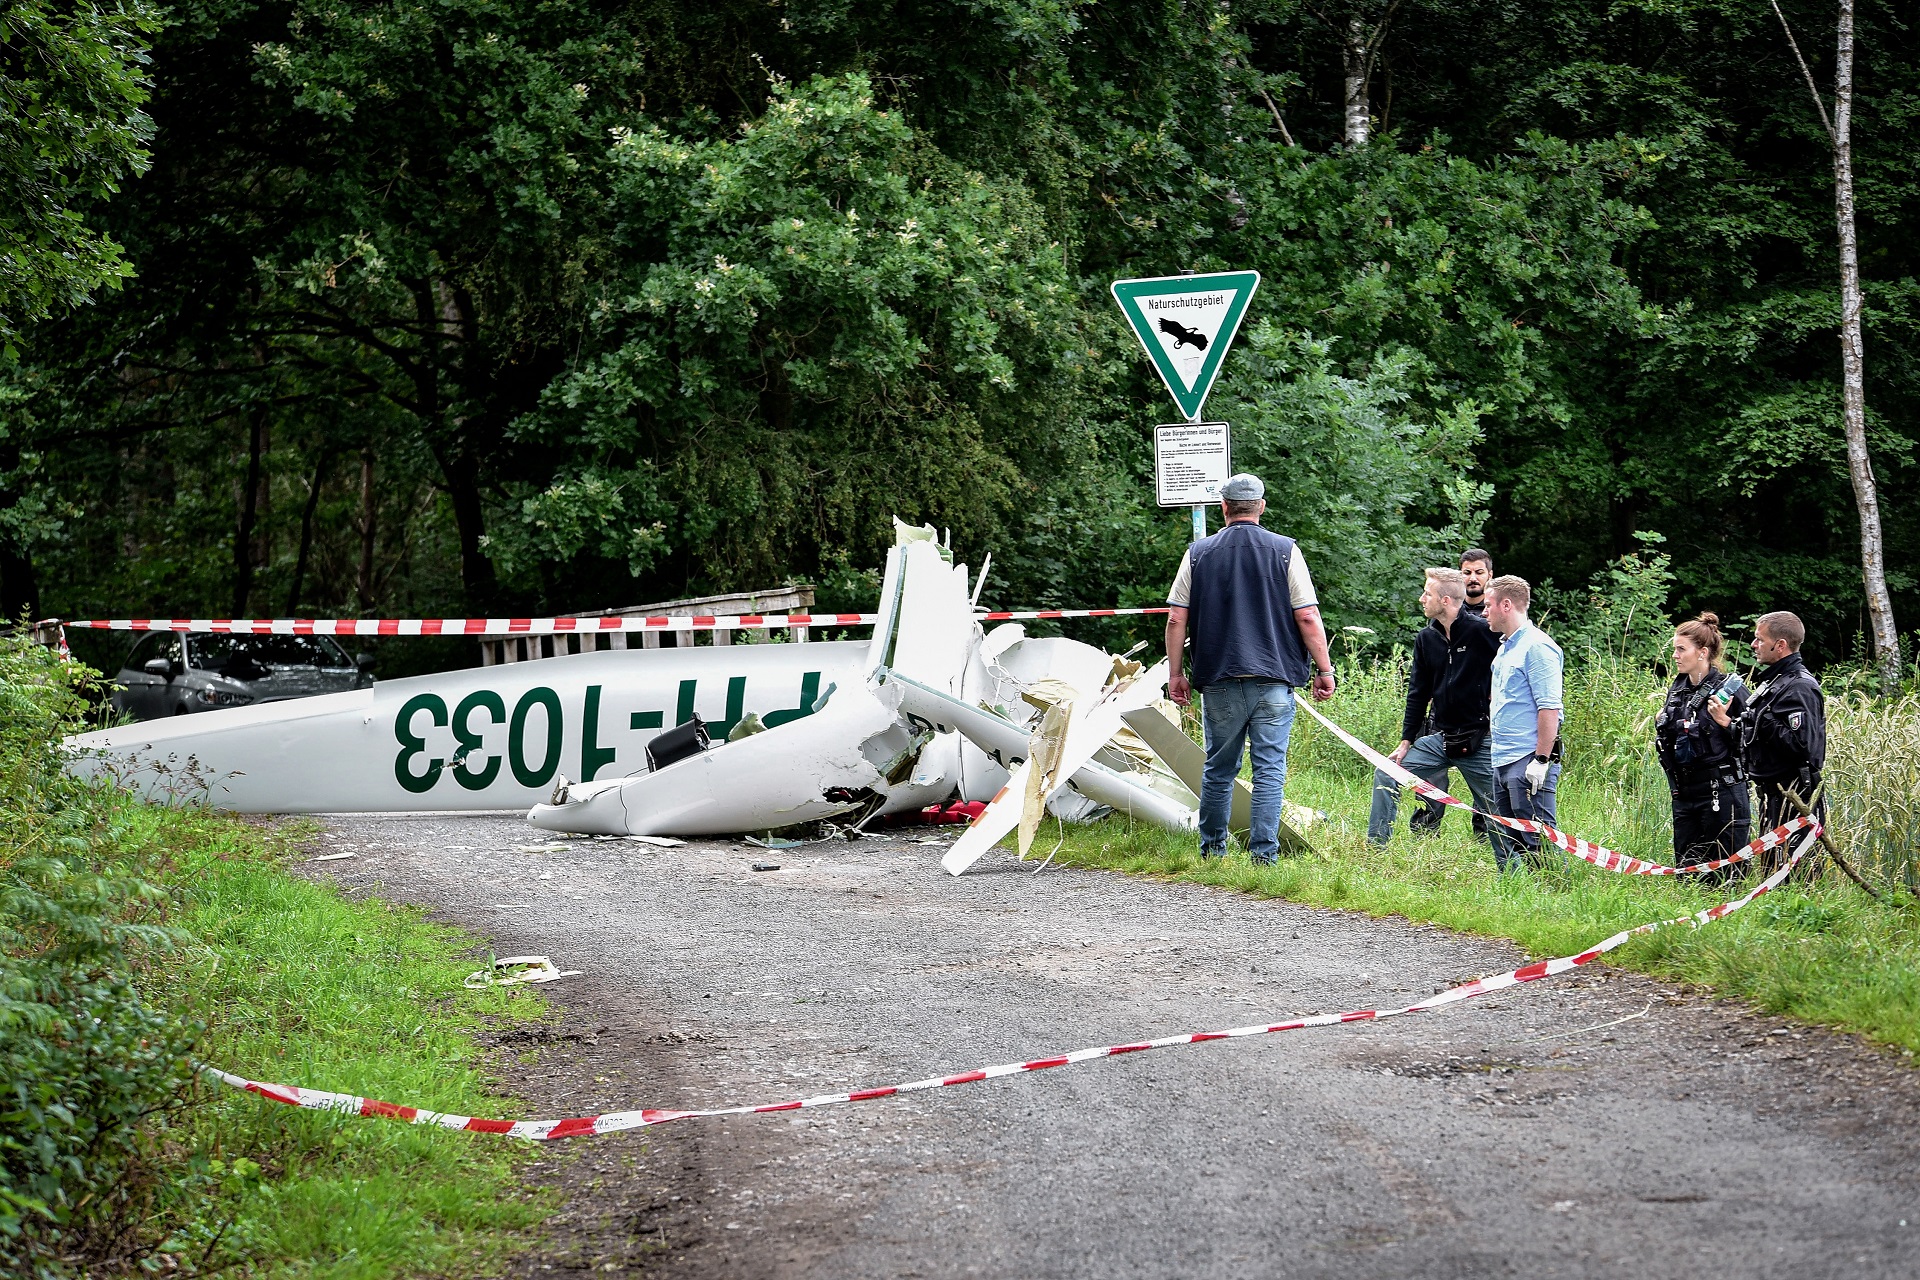 epa08541010 Police officers inspect the wreckage of a plane that crashed in Duelmen, Germany, 11 July 2020. For reasons still unknown, two gliders collided and crashed in mid-air over a wooded area at Silbersee between Duelmen and Haltern am See. Both gliders were completely destroyed. According to initial information, the two pilots of the planes died in the crash.  EPA/VINCENT KEMPF